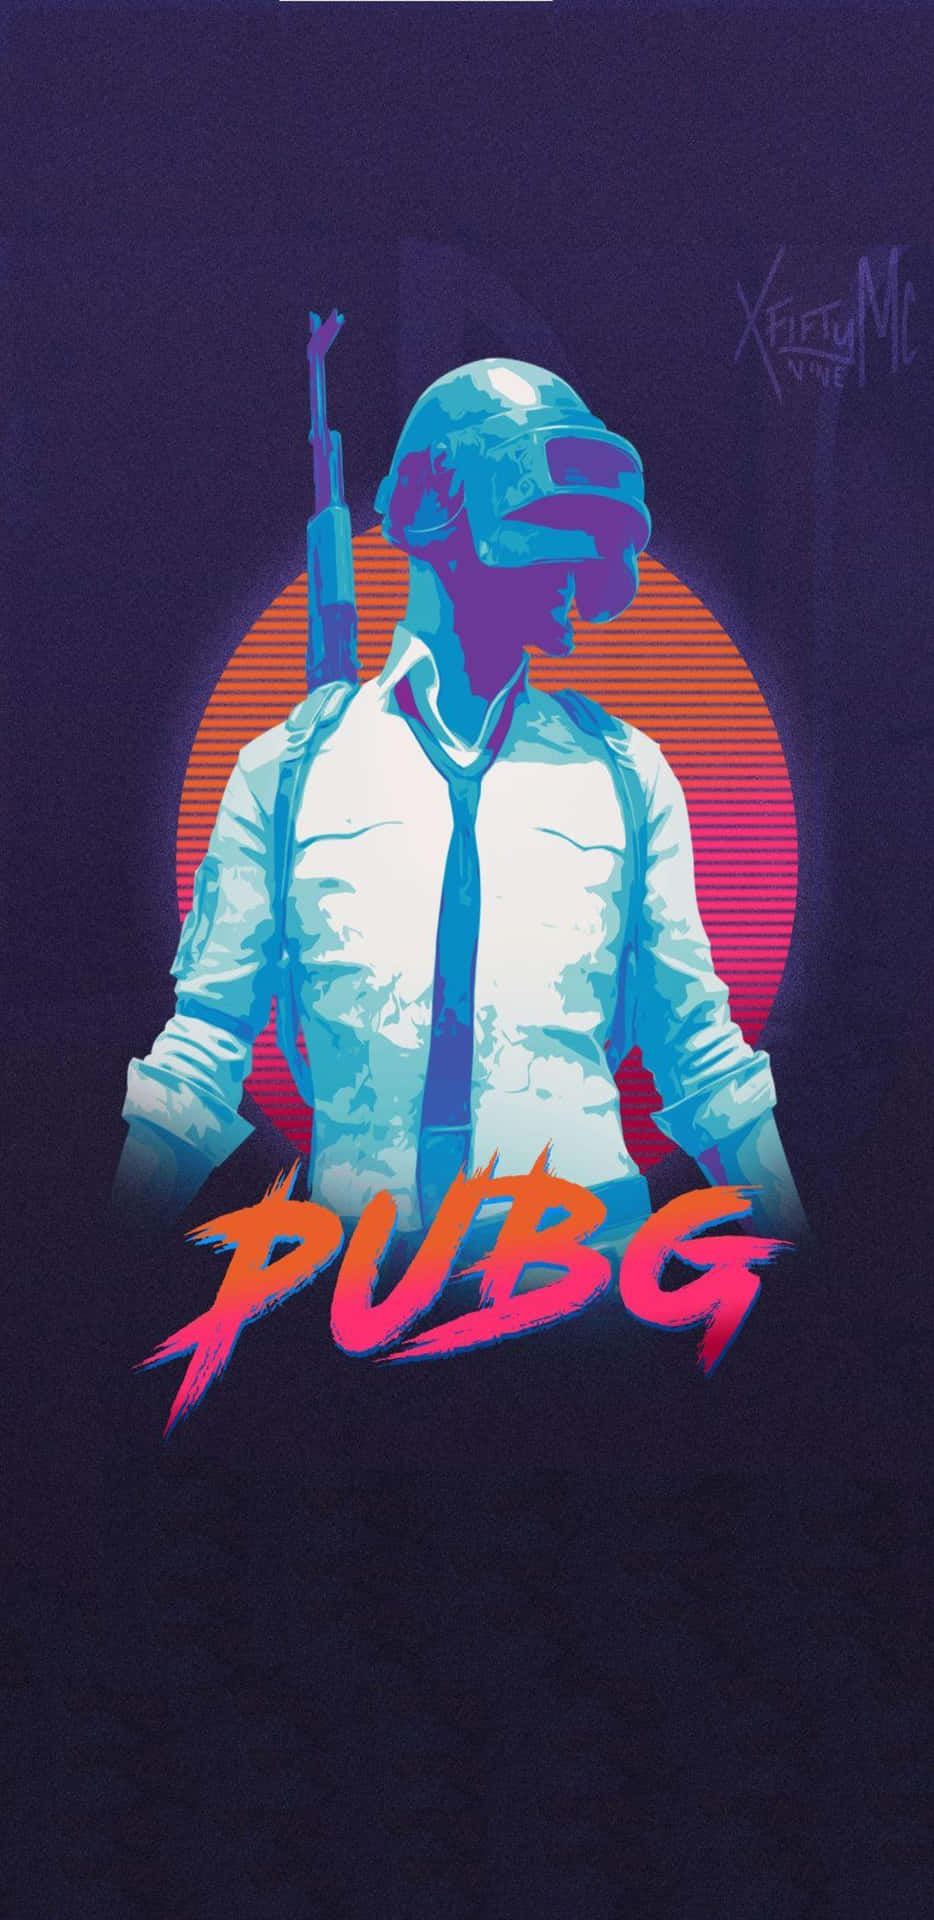 Pixel 3xl Playerunknown's Battlegrounds Background Poster Miami Vice Effect